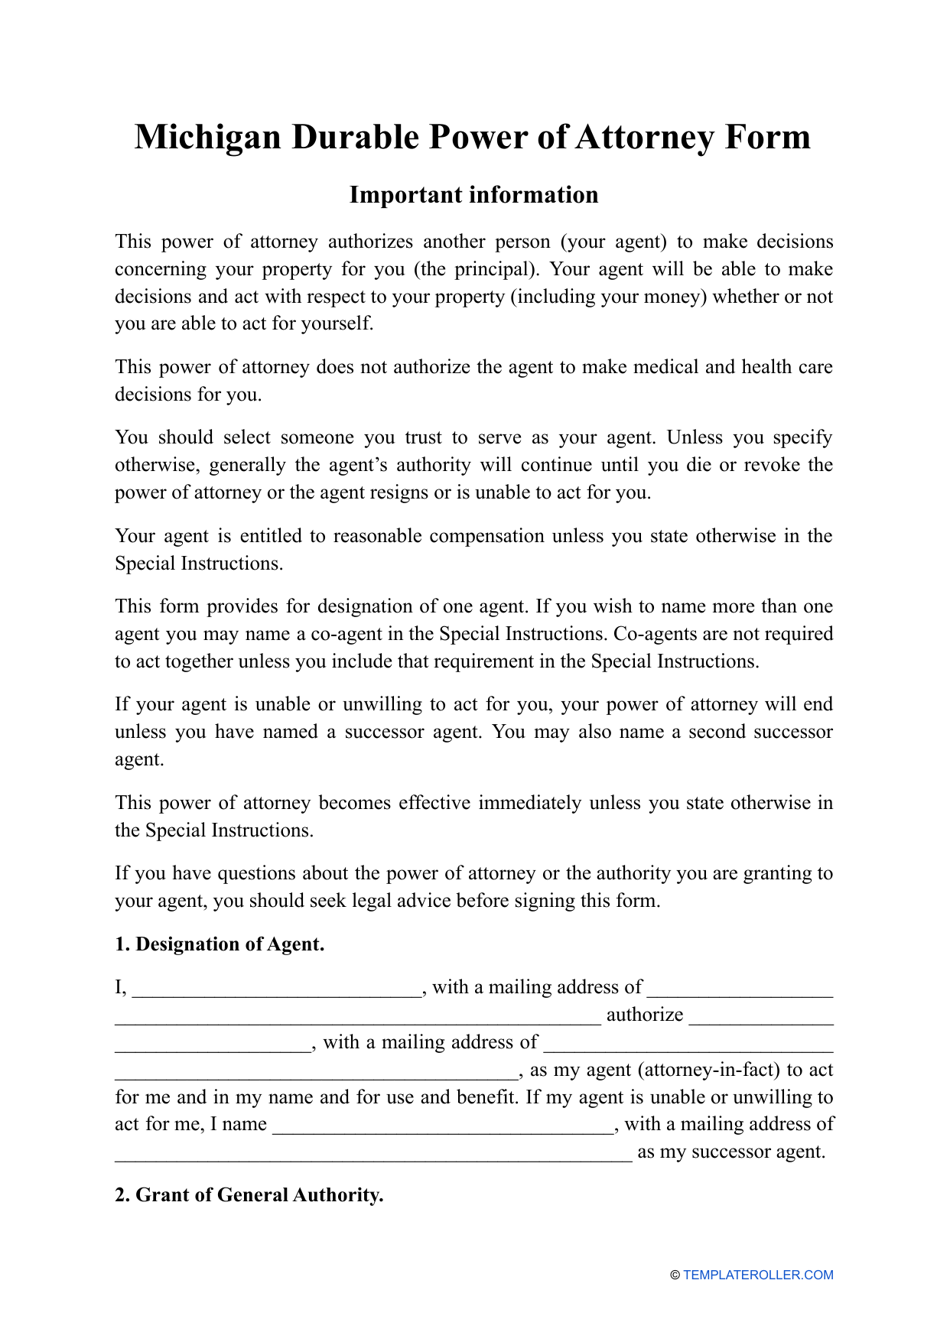 Durable Power of Attorney Form - Michigan, Page 1